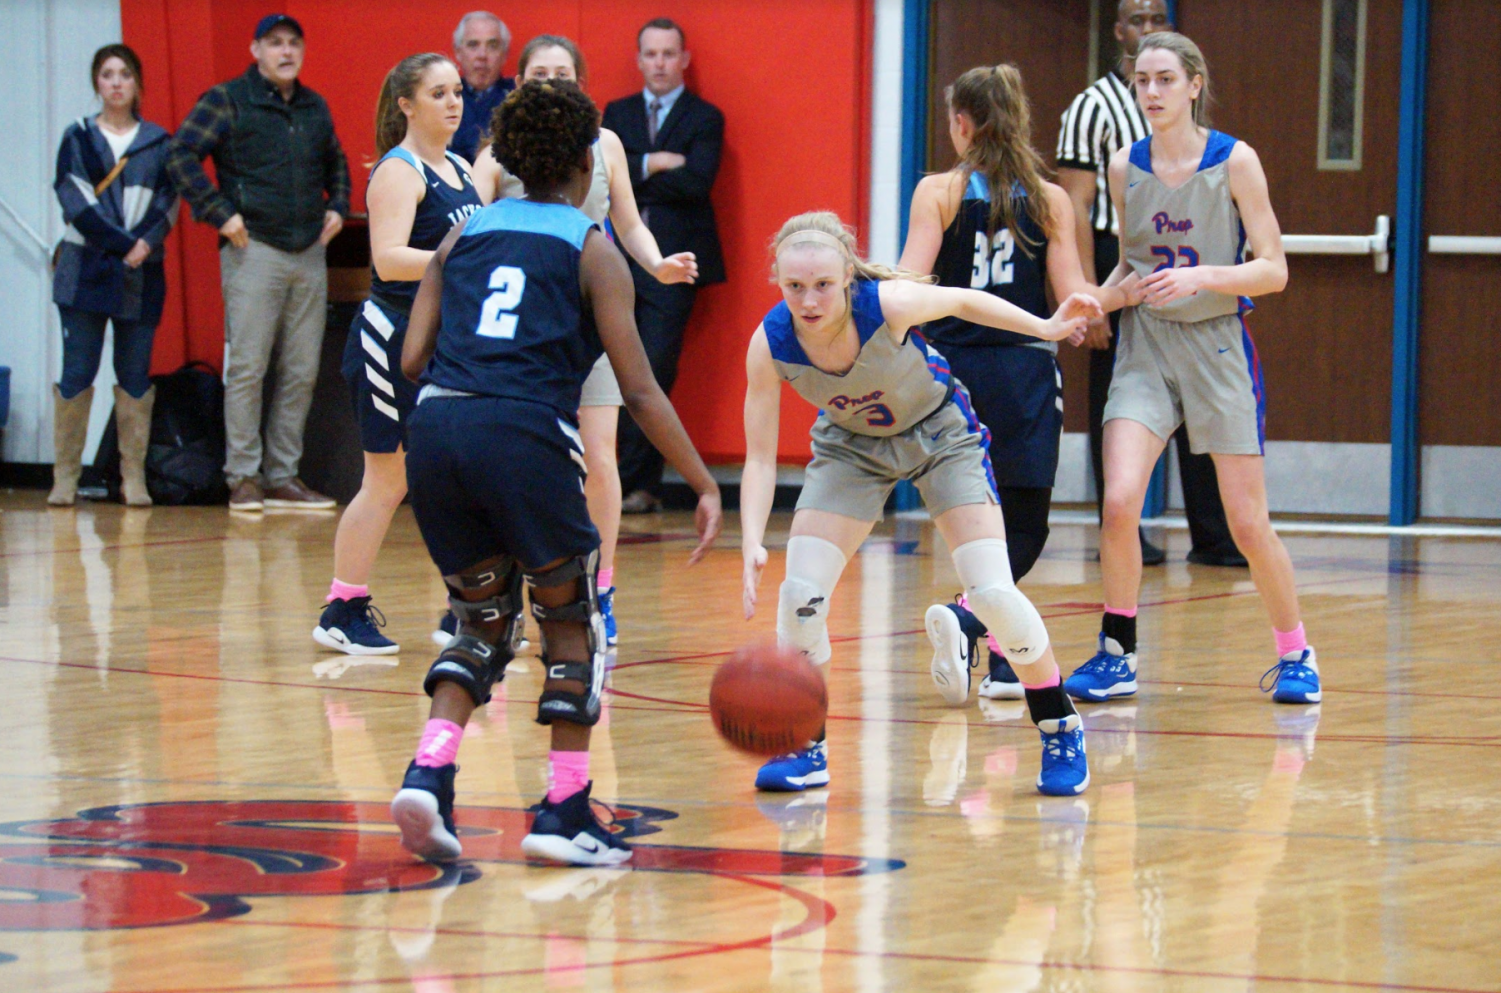 Sophomore guard Andie Flatgard stops her opponent near the half-court line during the regular season.